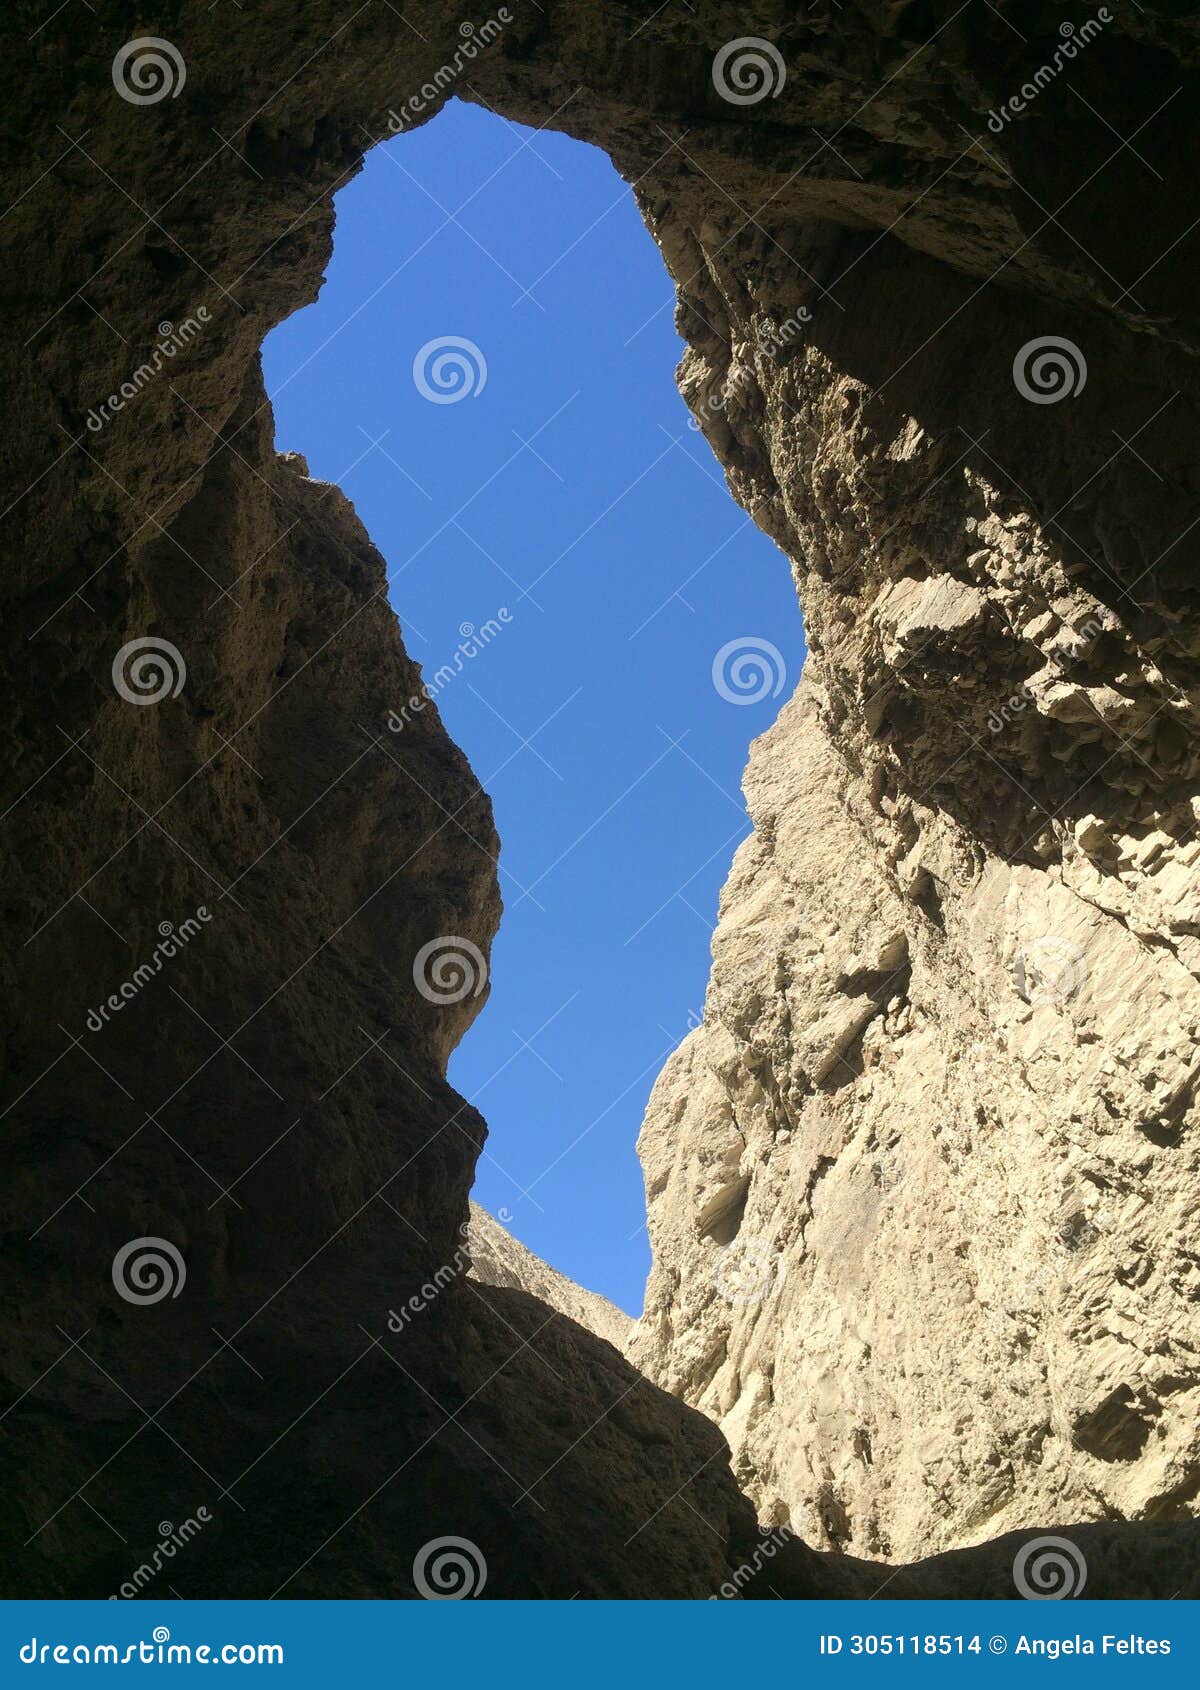 blue skies above tapiado mud caves, anza borrego state park